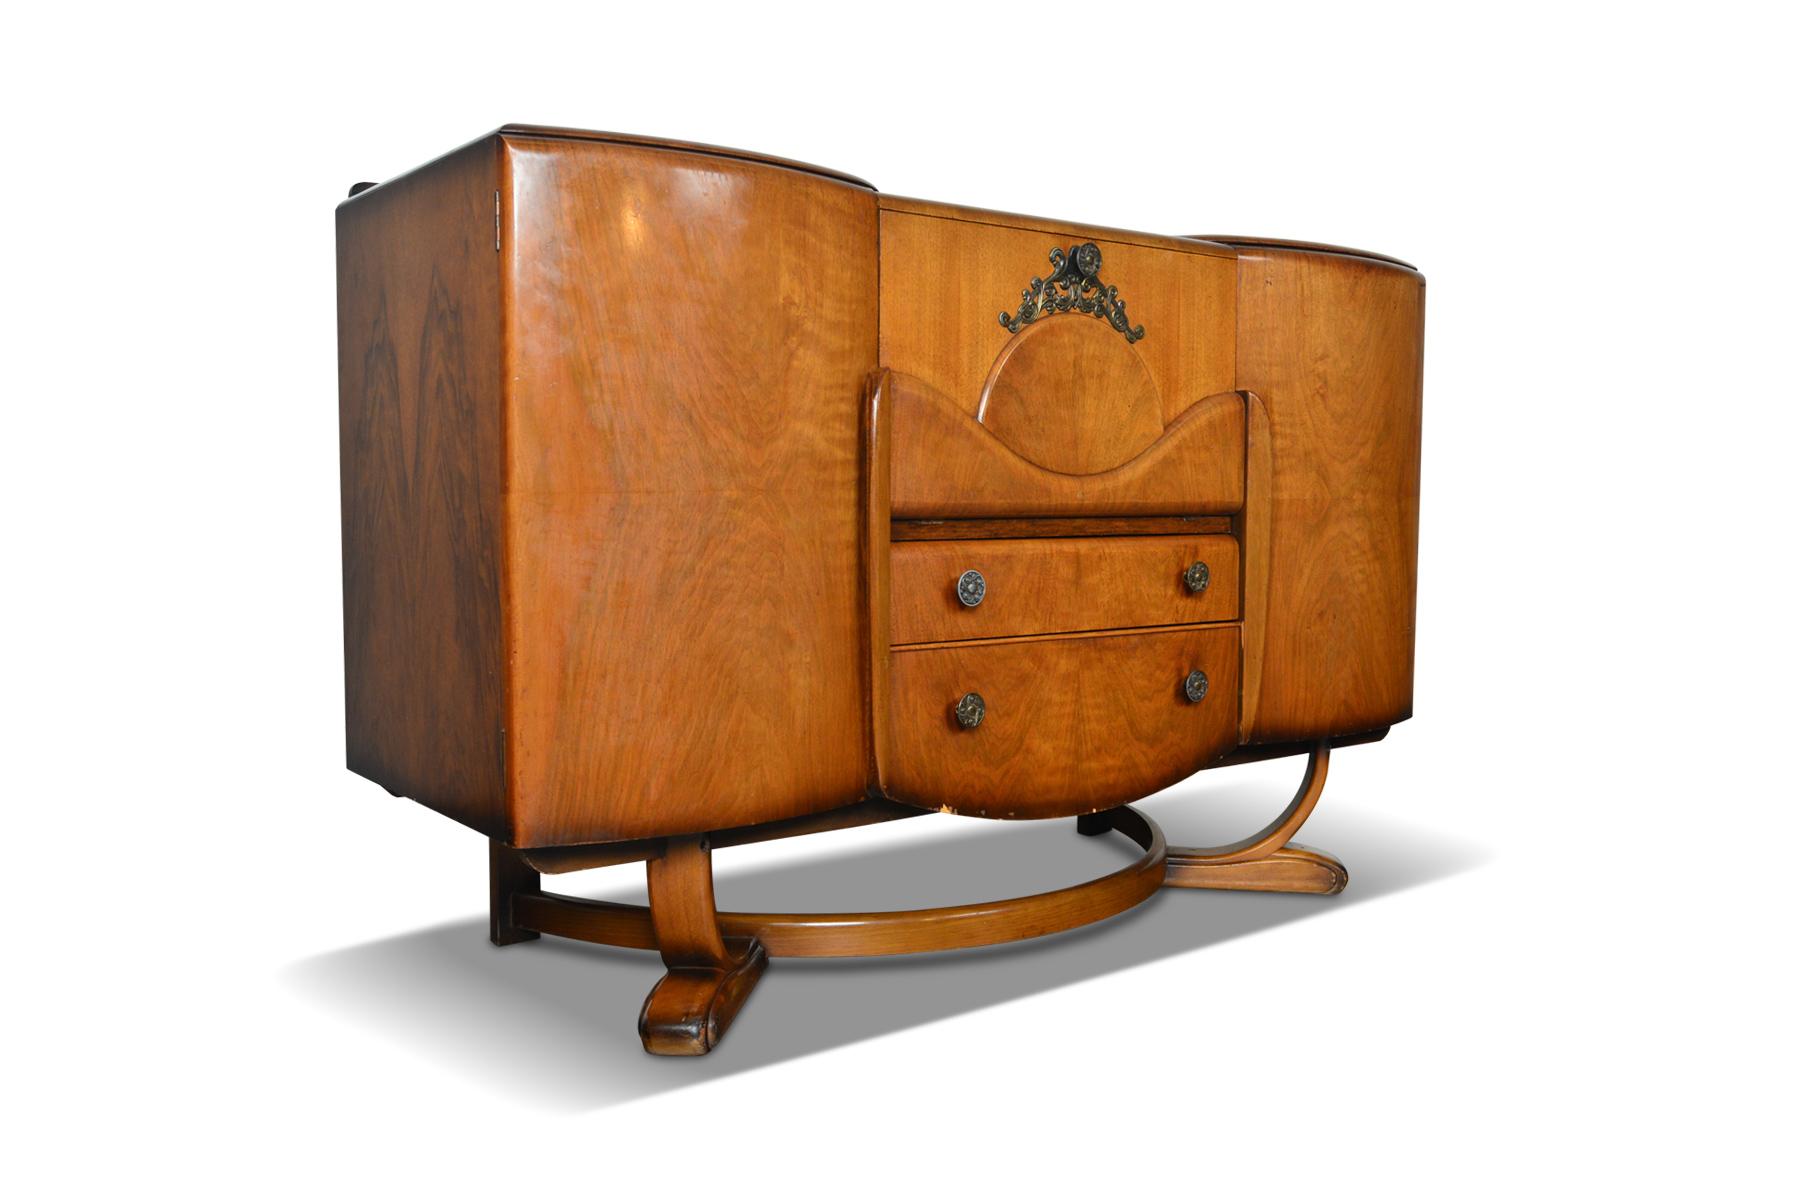 Mid-20th Century Beautility Art Deco Cocktail Bar / Drinks Cabinet in Walnut